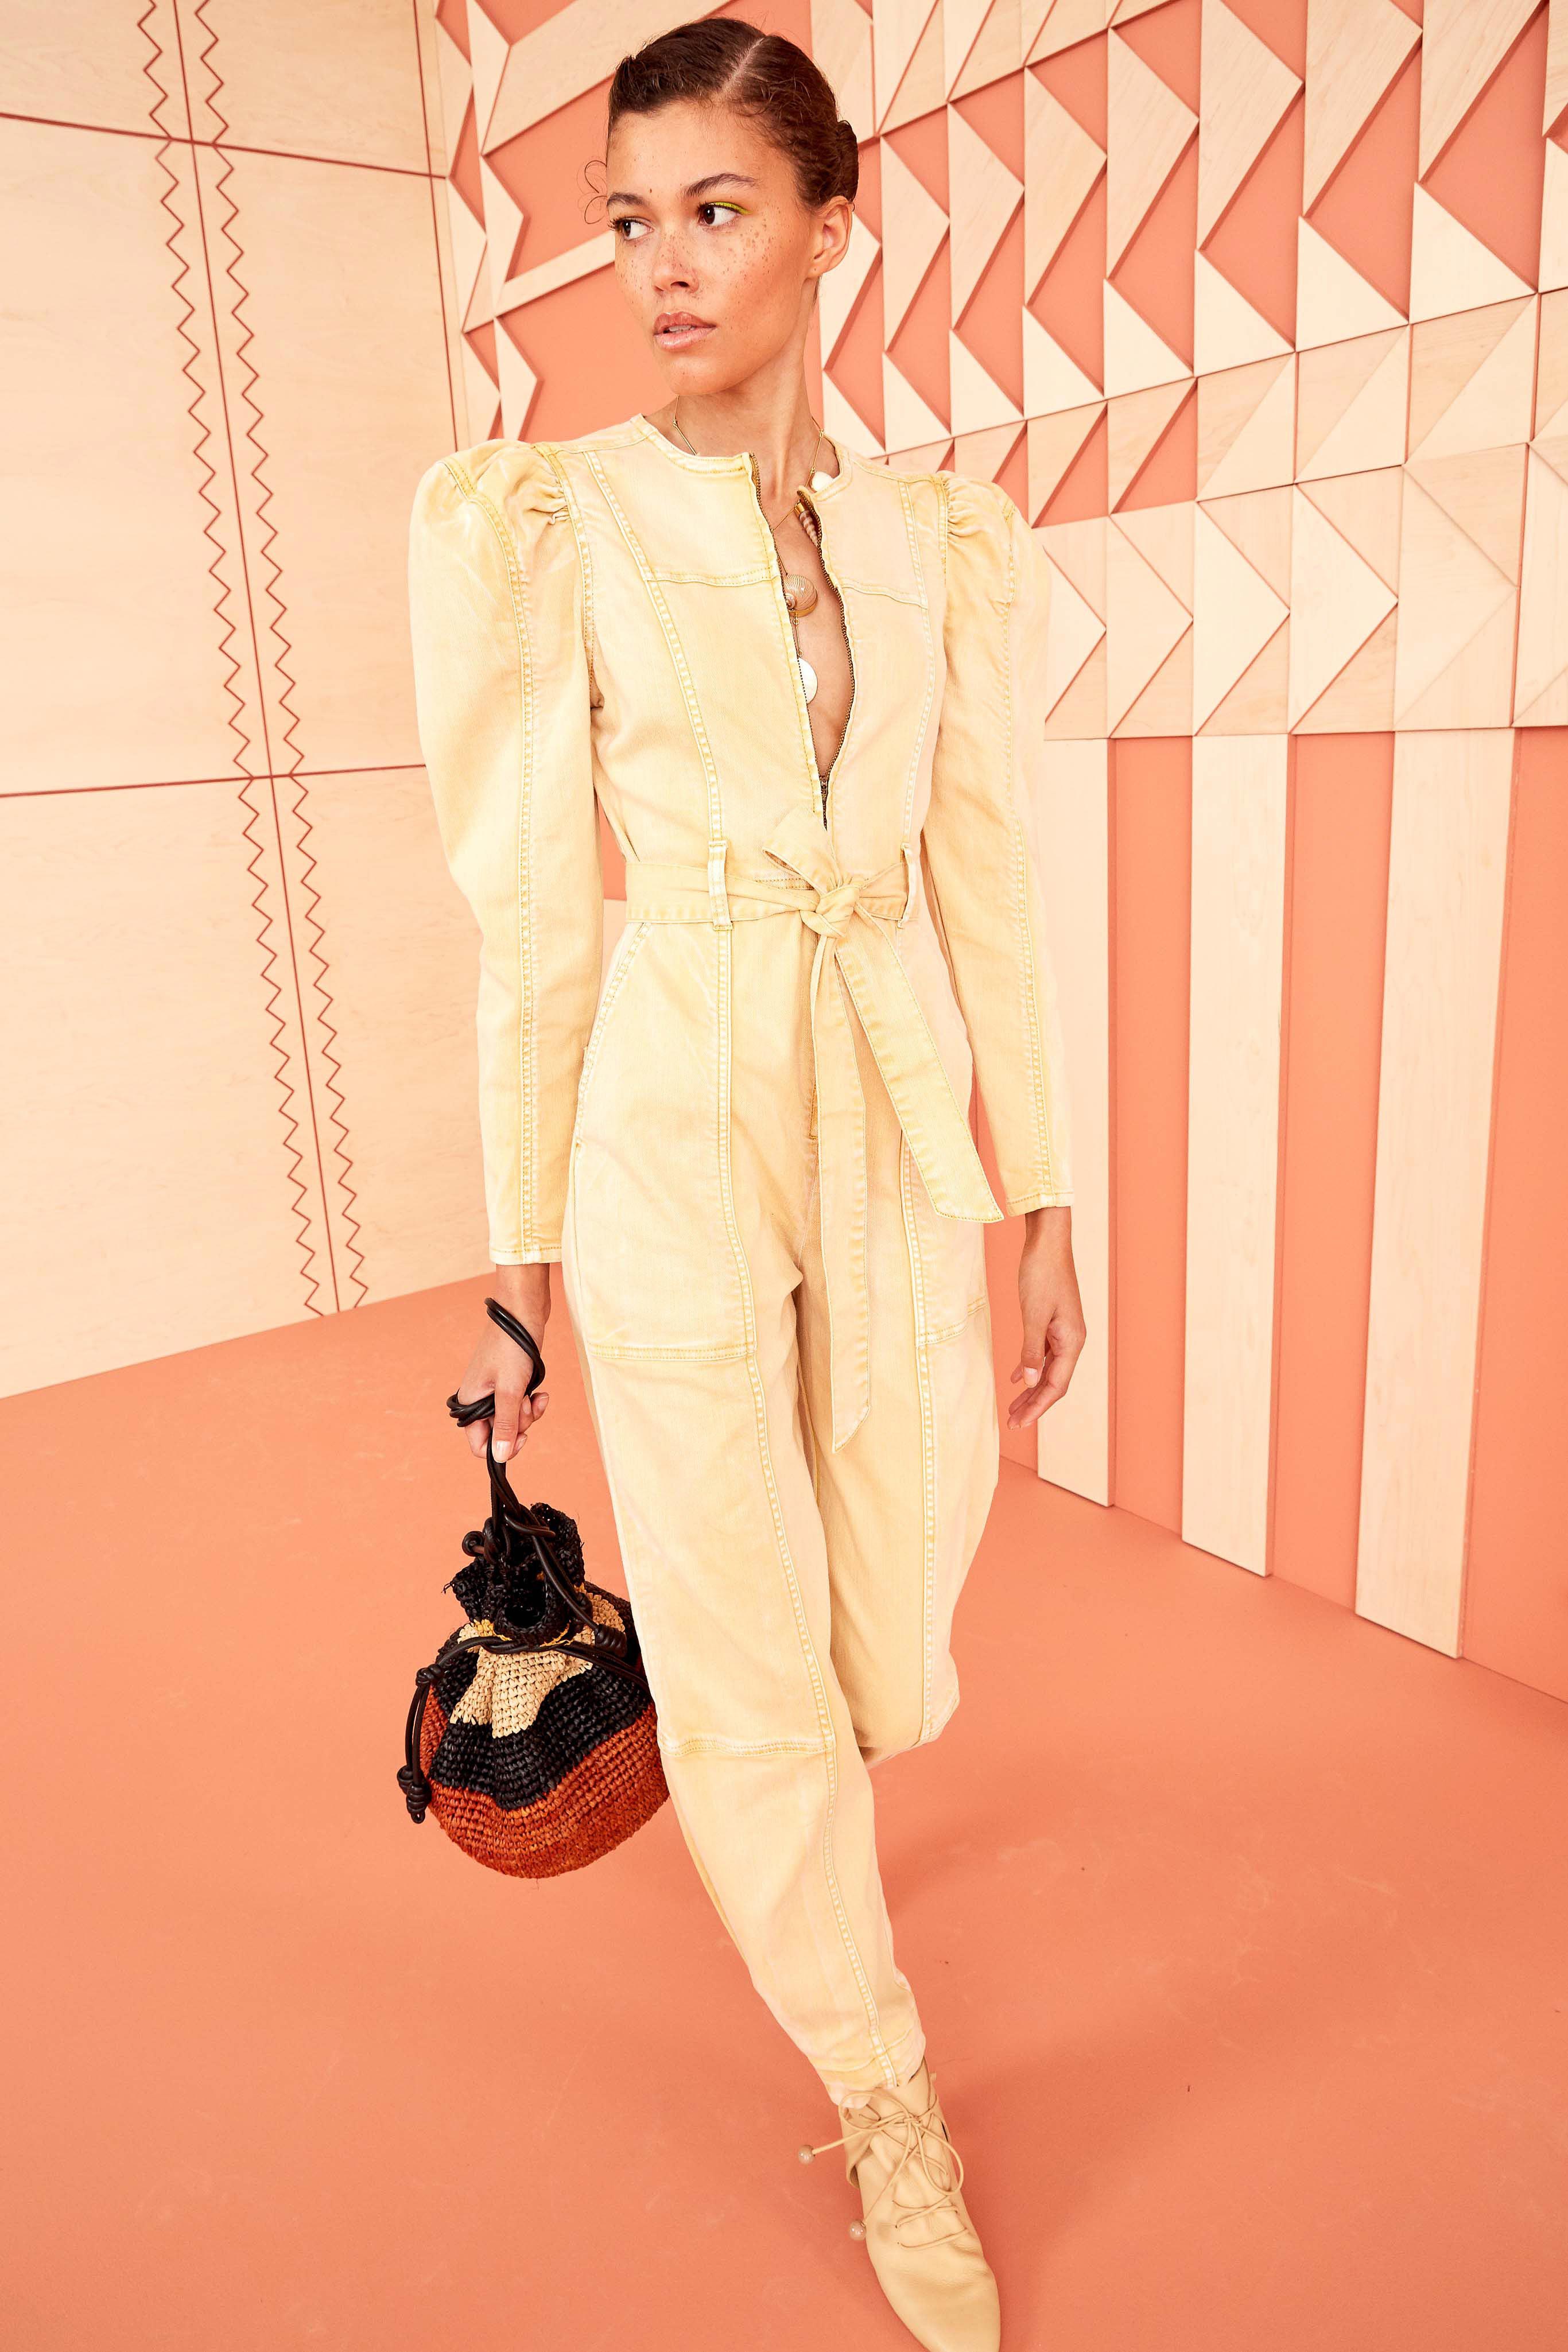 Ulla Johnson resort 2020 fashion week trends resort 2020 runway fashion trend report vogue Best trends from the resort 2020 collections